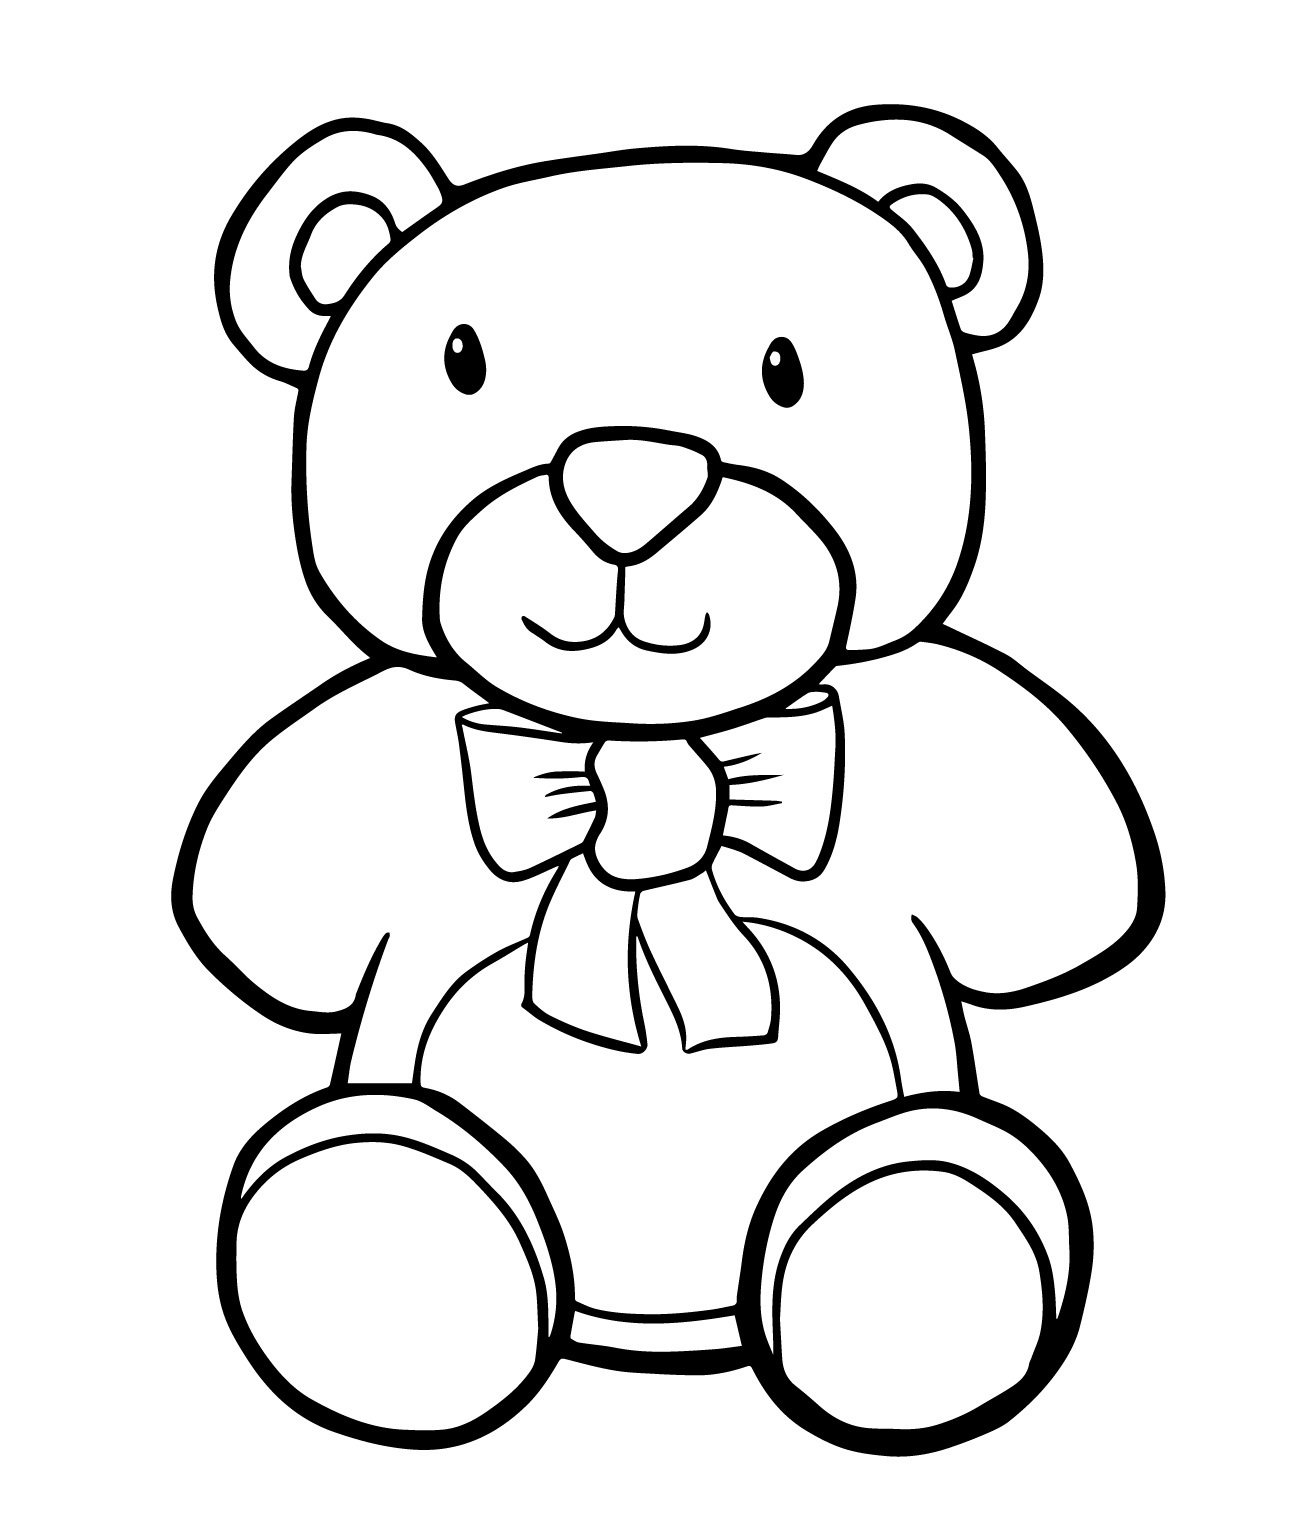 stuffy coloring page Stuffed animal coloring pages at getdrawings